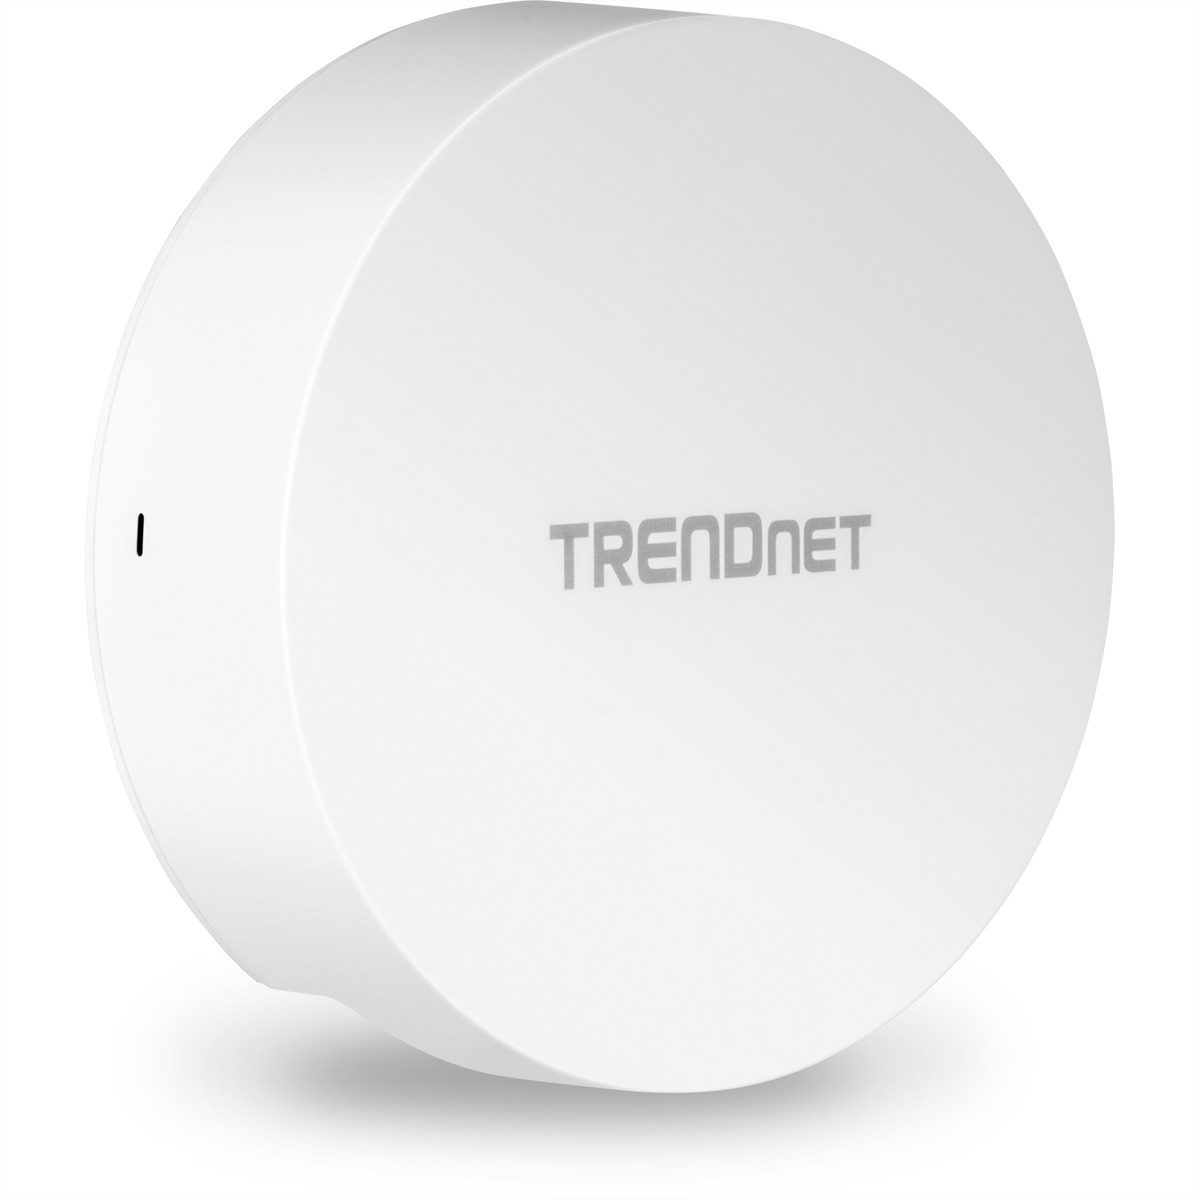 Trendnet TEW-823DAP Access Point WLAN-Repeater, AC1300 Dual Band PoE Indoor Wireless